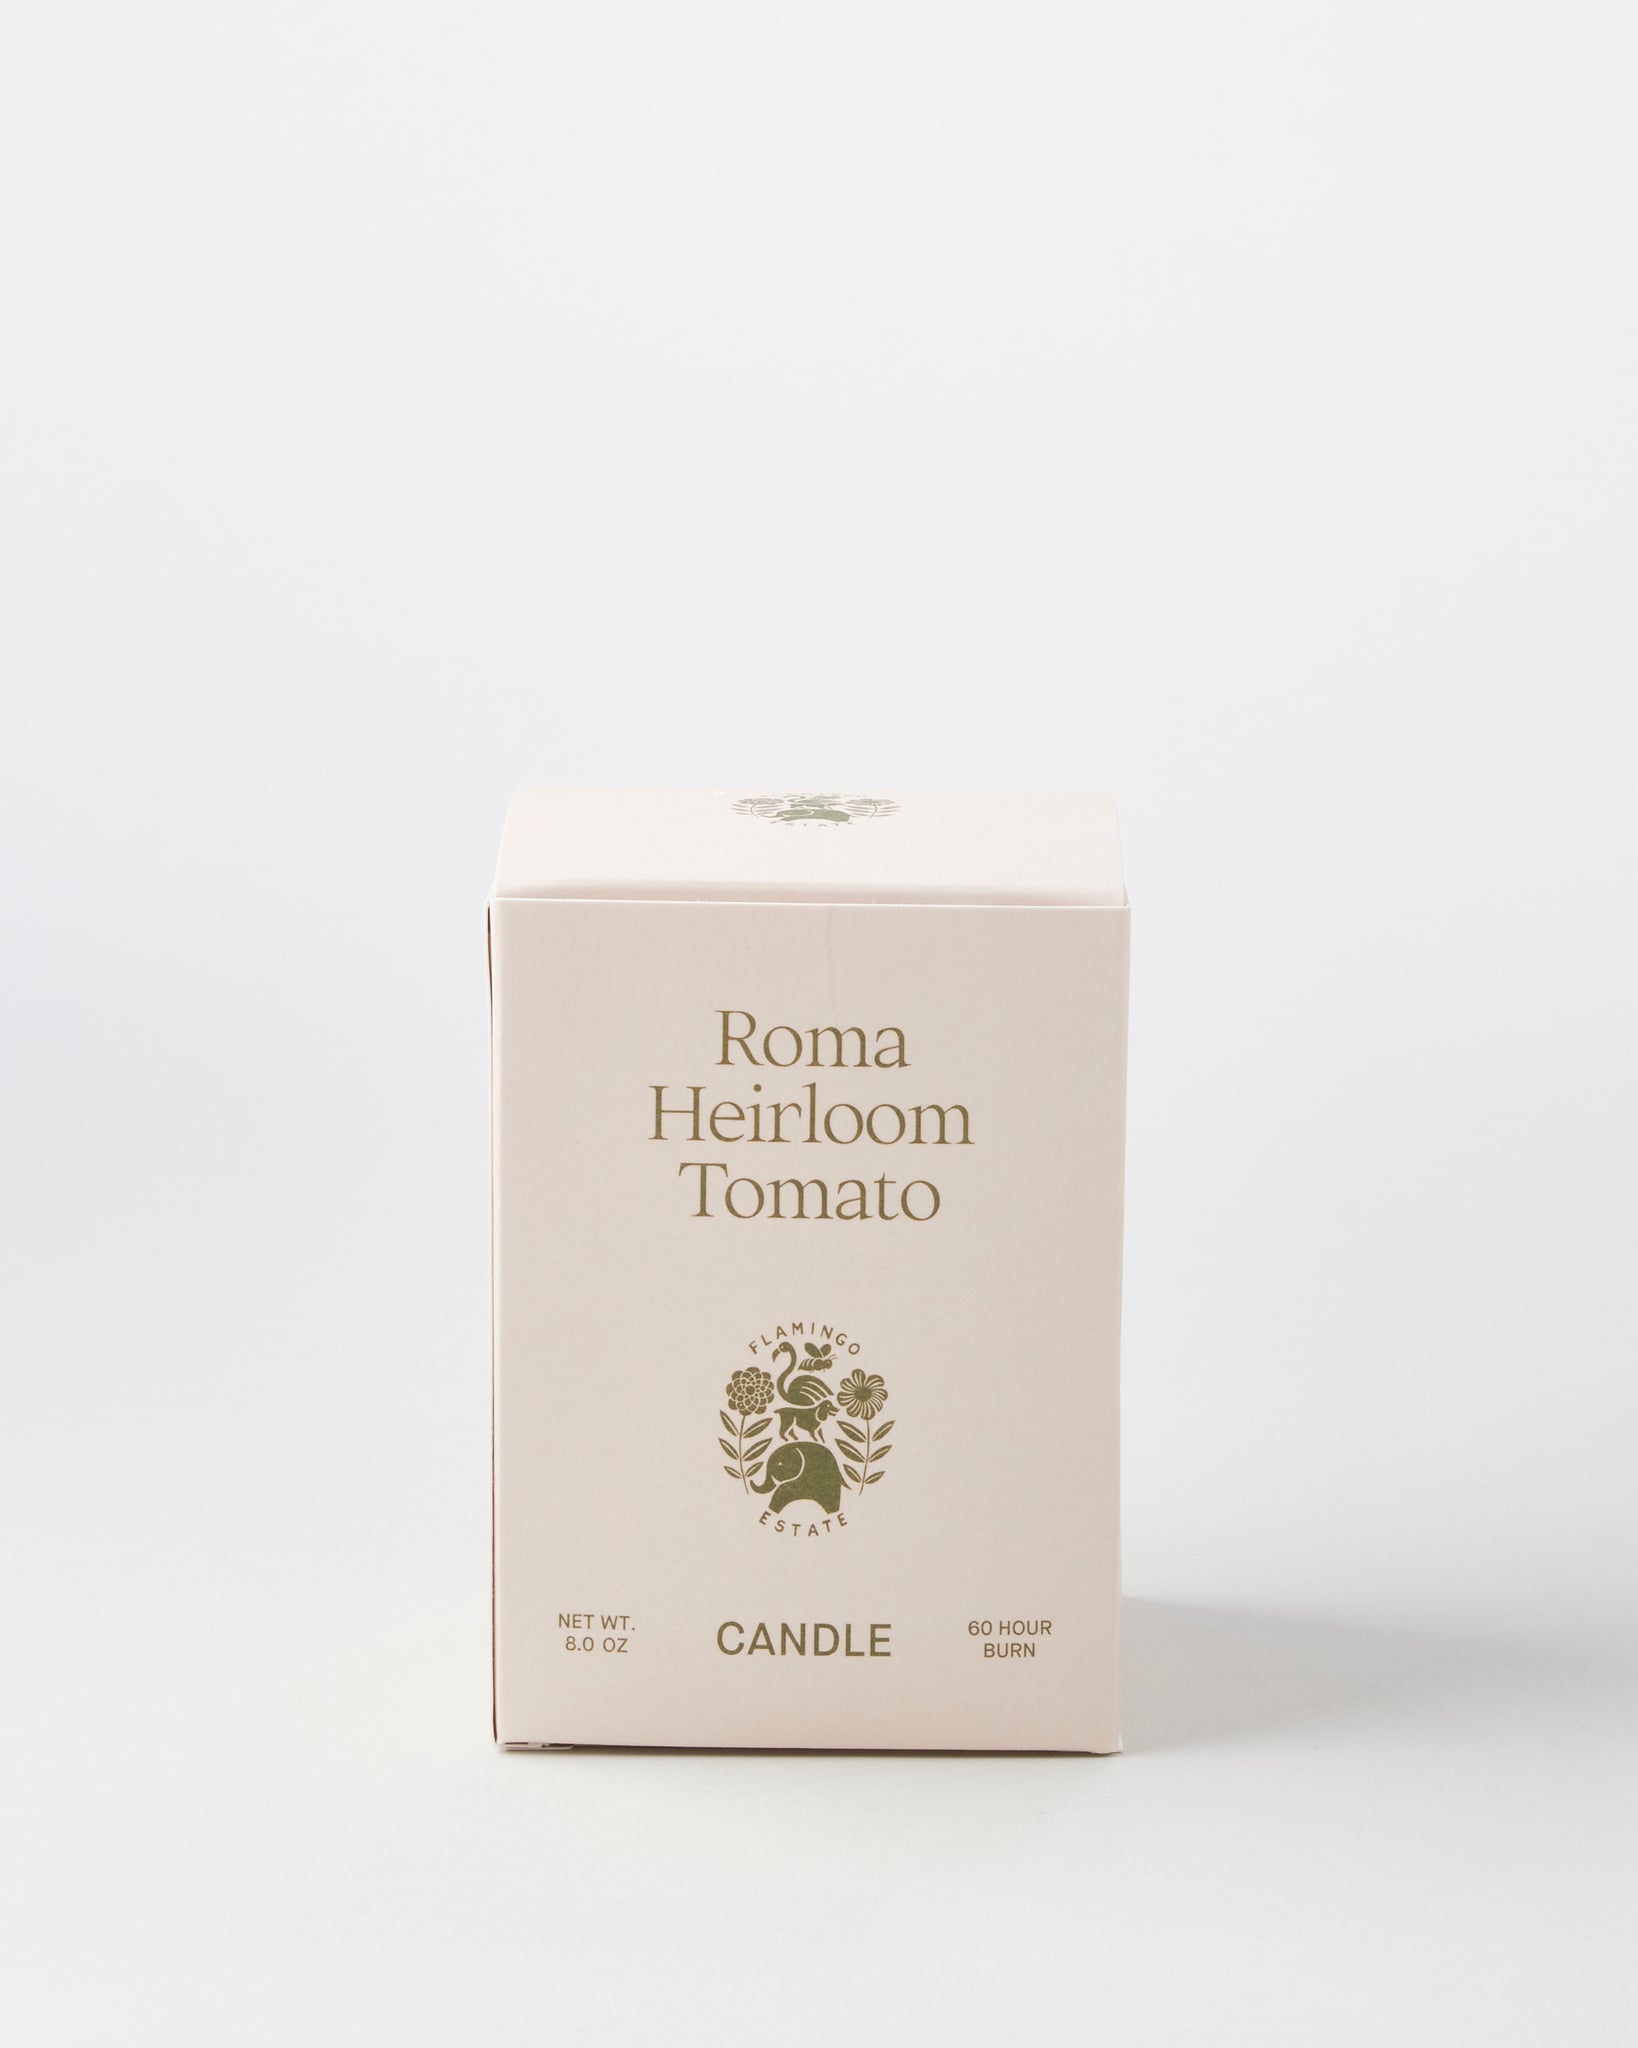 Roma Heirloom Tomato Scented Candle